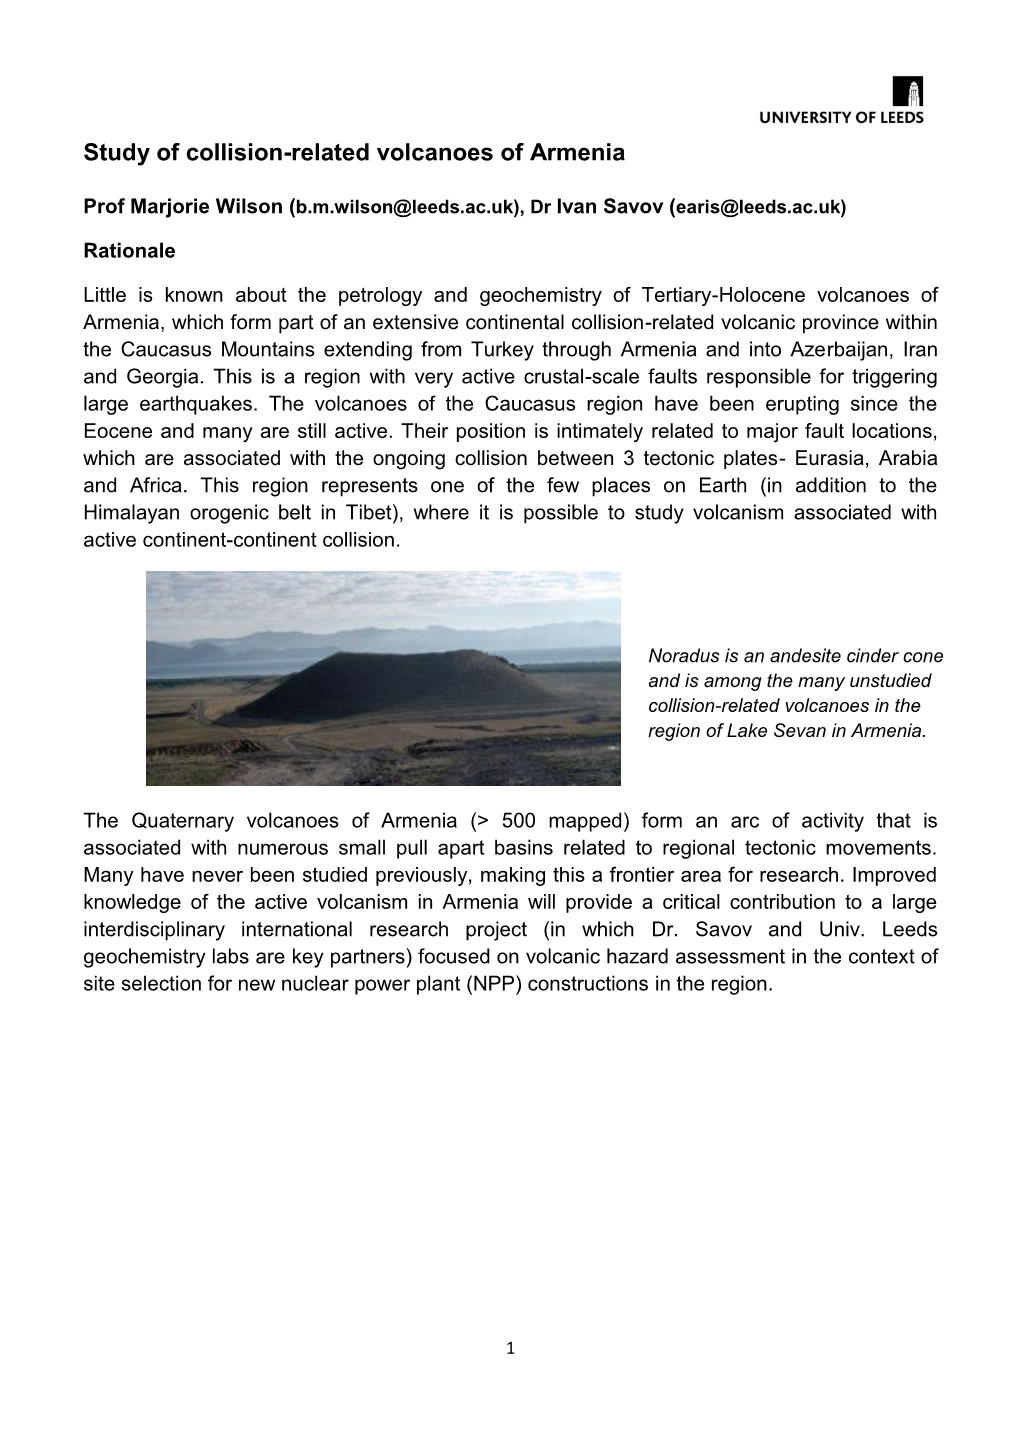 Study of Collision-Related Volcanoes of Armenia